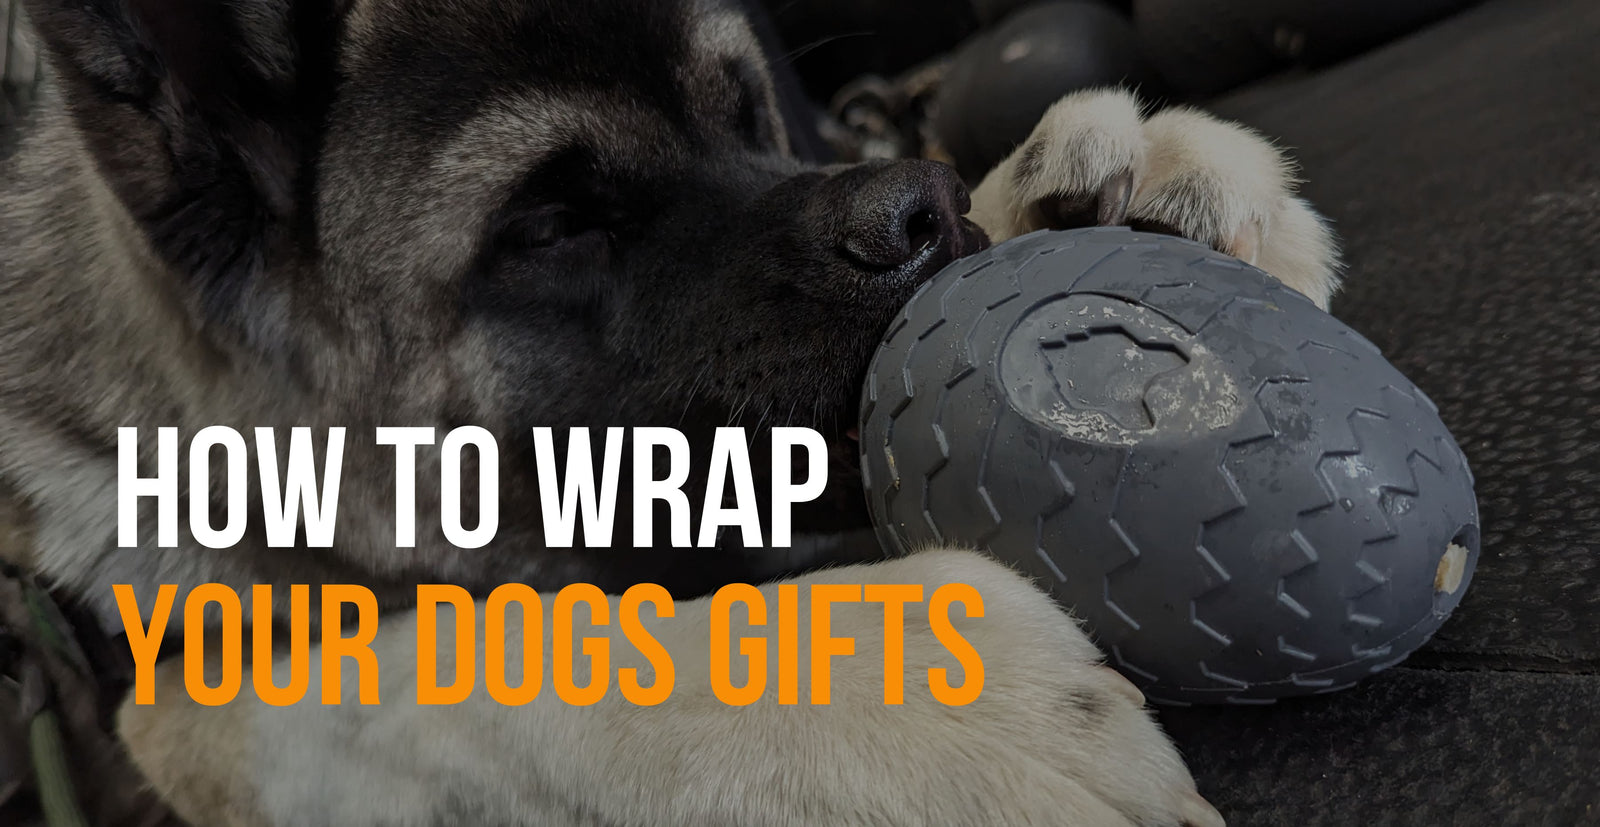 fenrir canine leaders how to wrap gifts for your dog